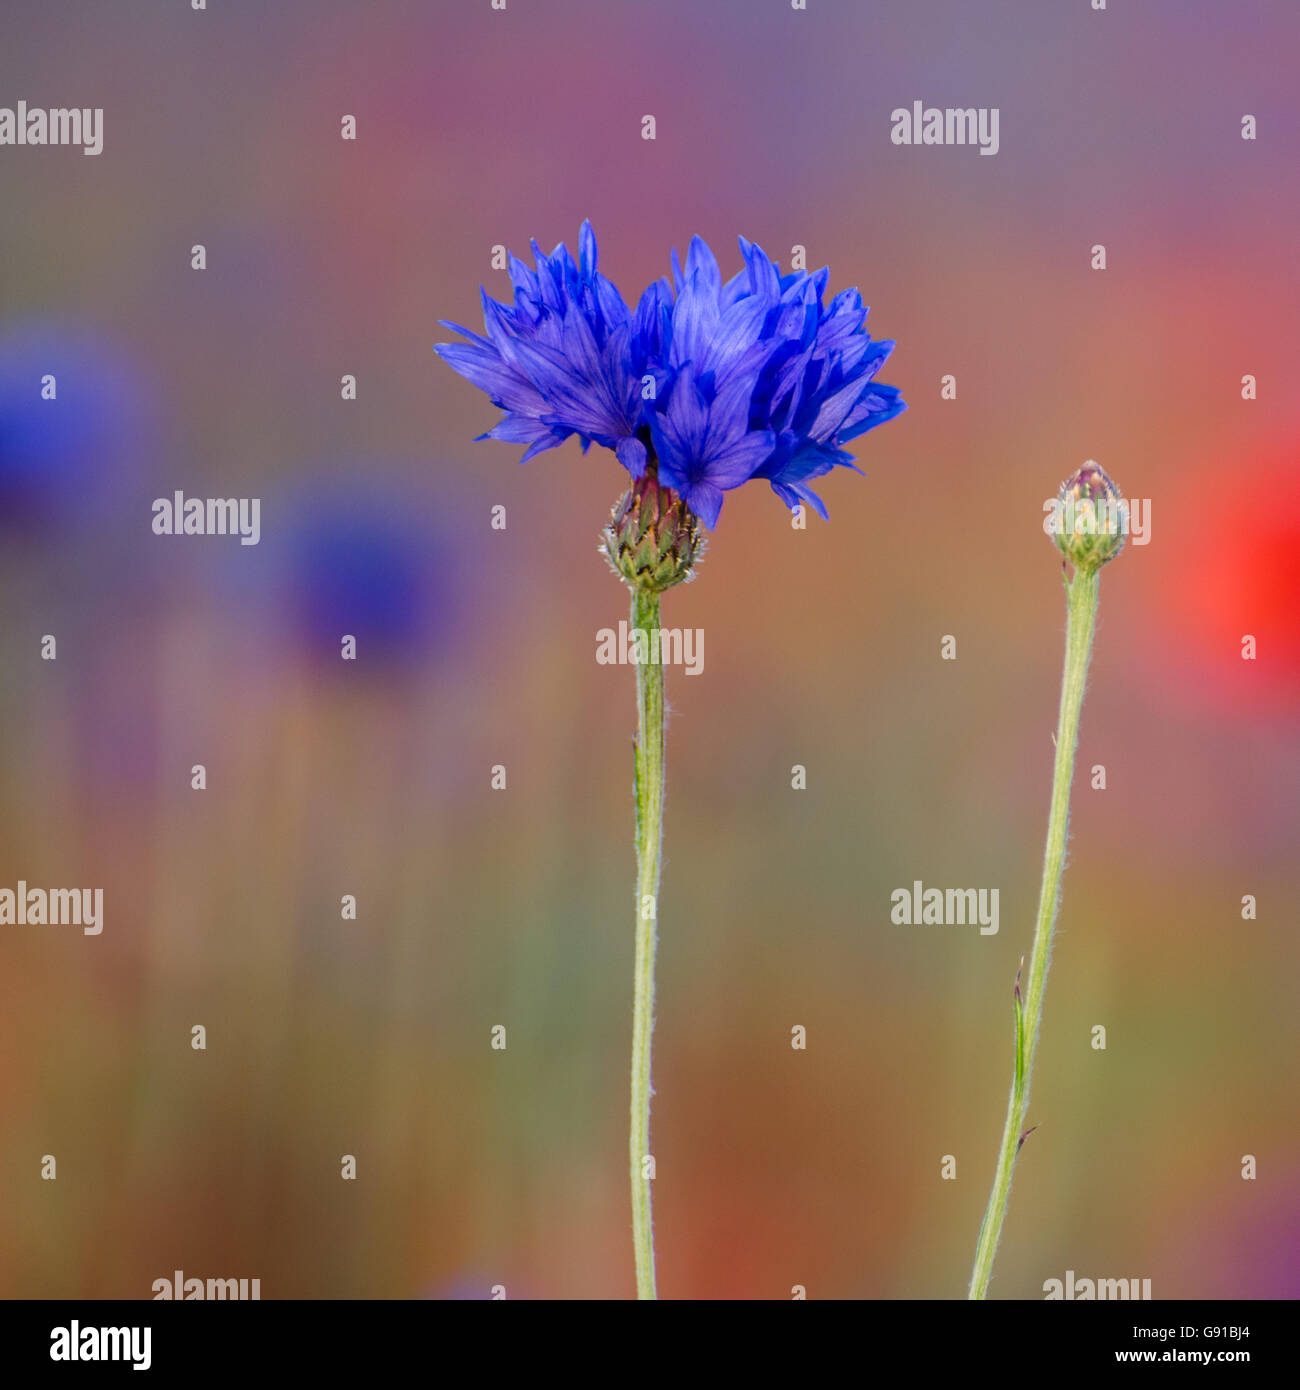 Closeup of a cornflower with a bud at a multicolored and blurred background Stock Photo